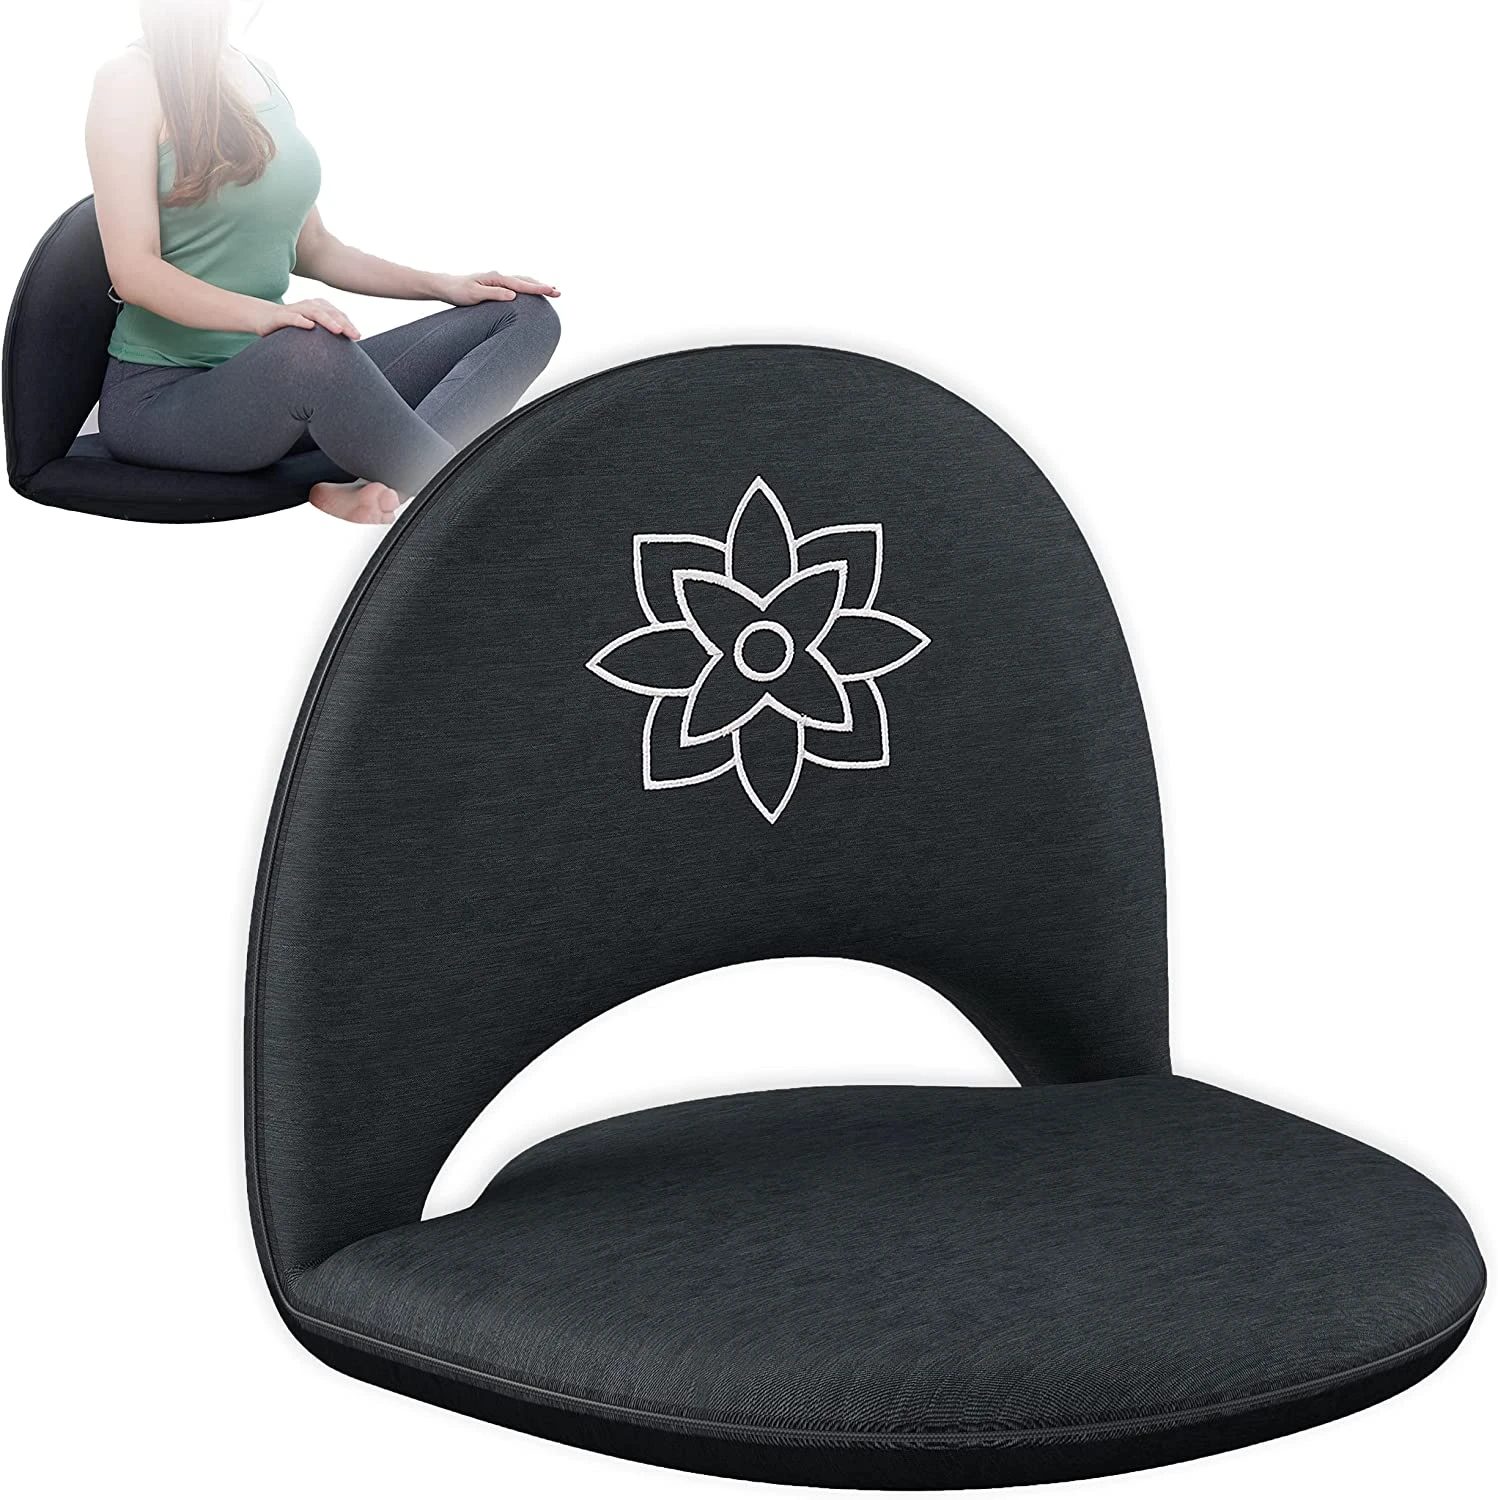 ul & Modern Meditation Chair with Back Support